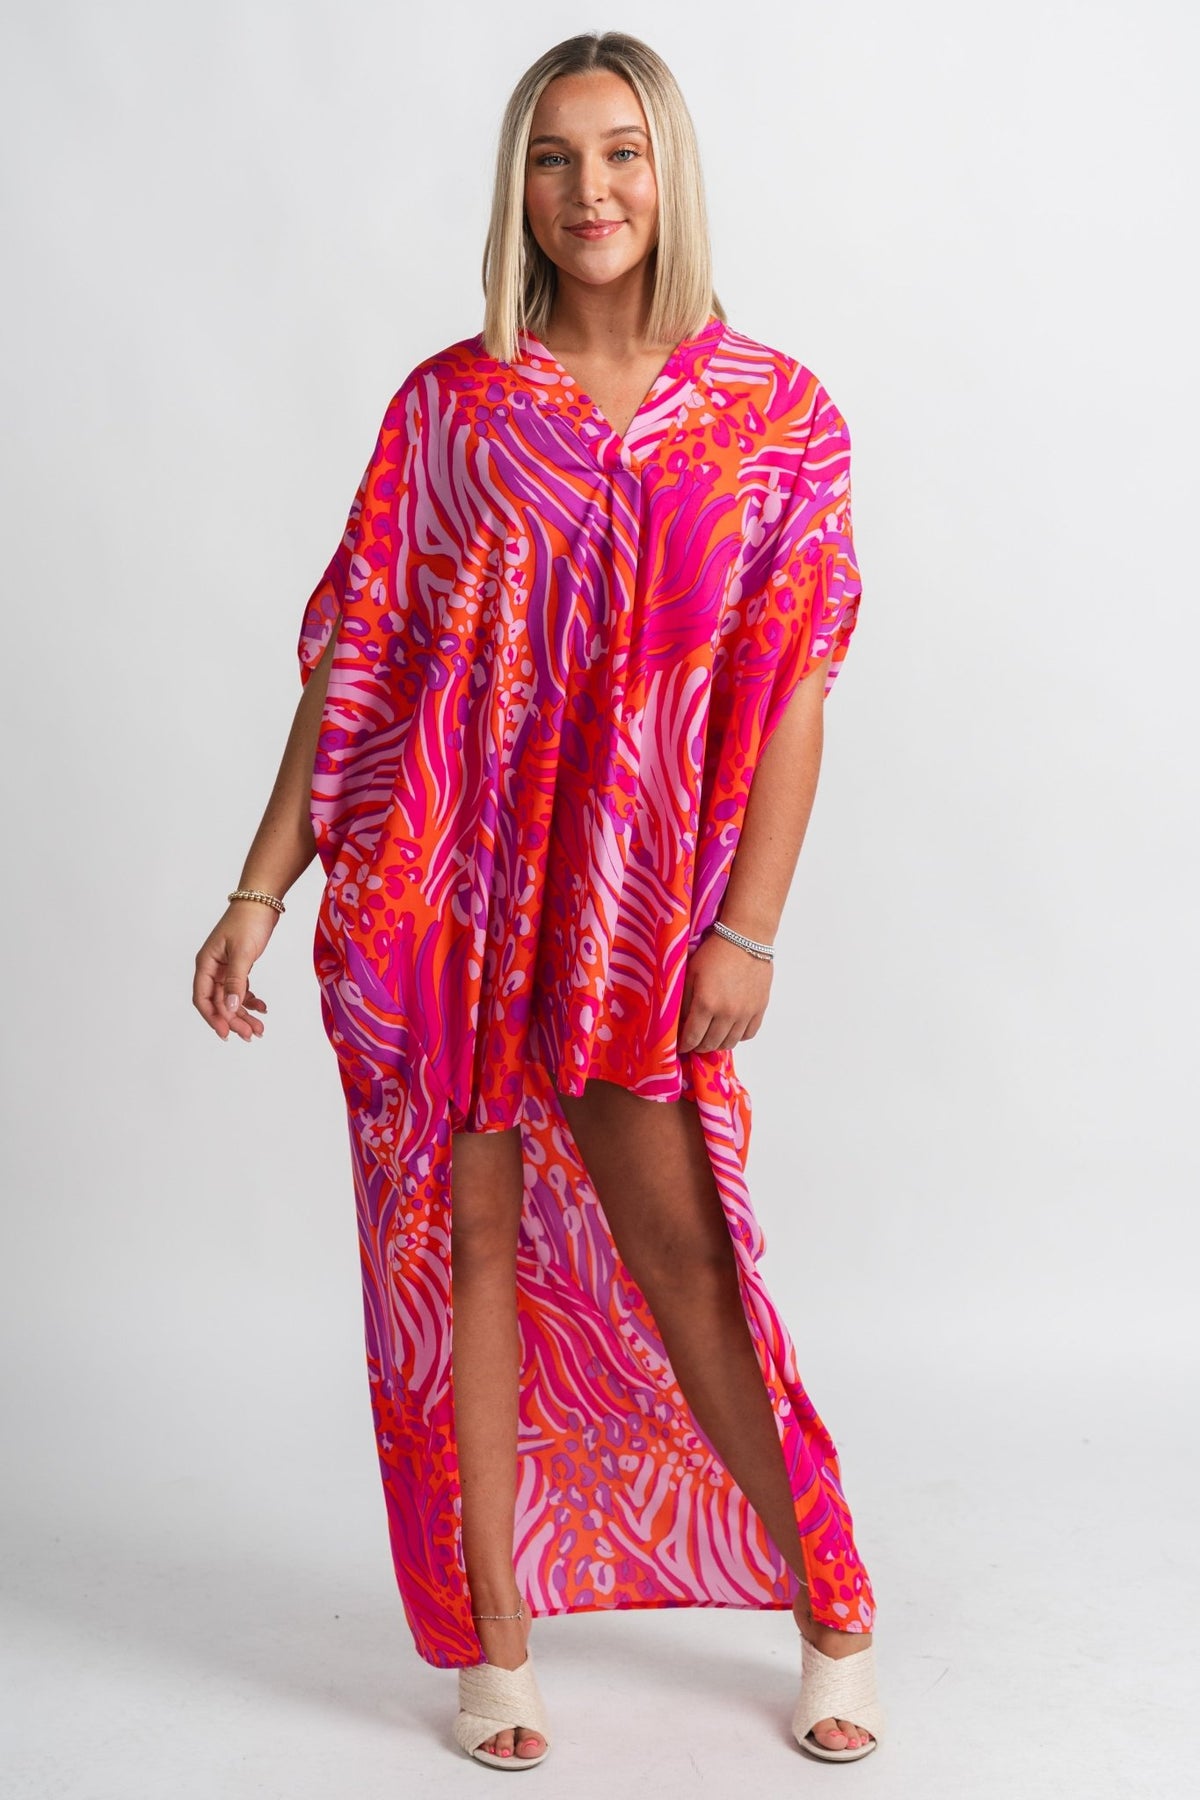 Printed high-low dress purple/orange - Trendy dress - Cute Vacation Collection at Lush Fashion Lounge Boutique in Oklahoma City